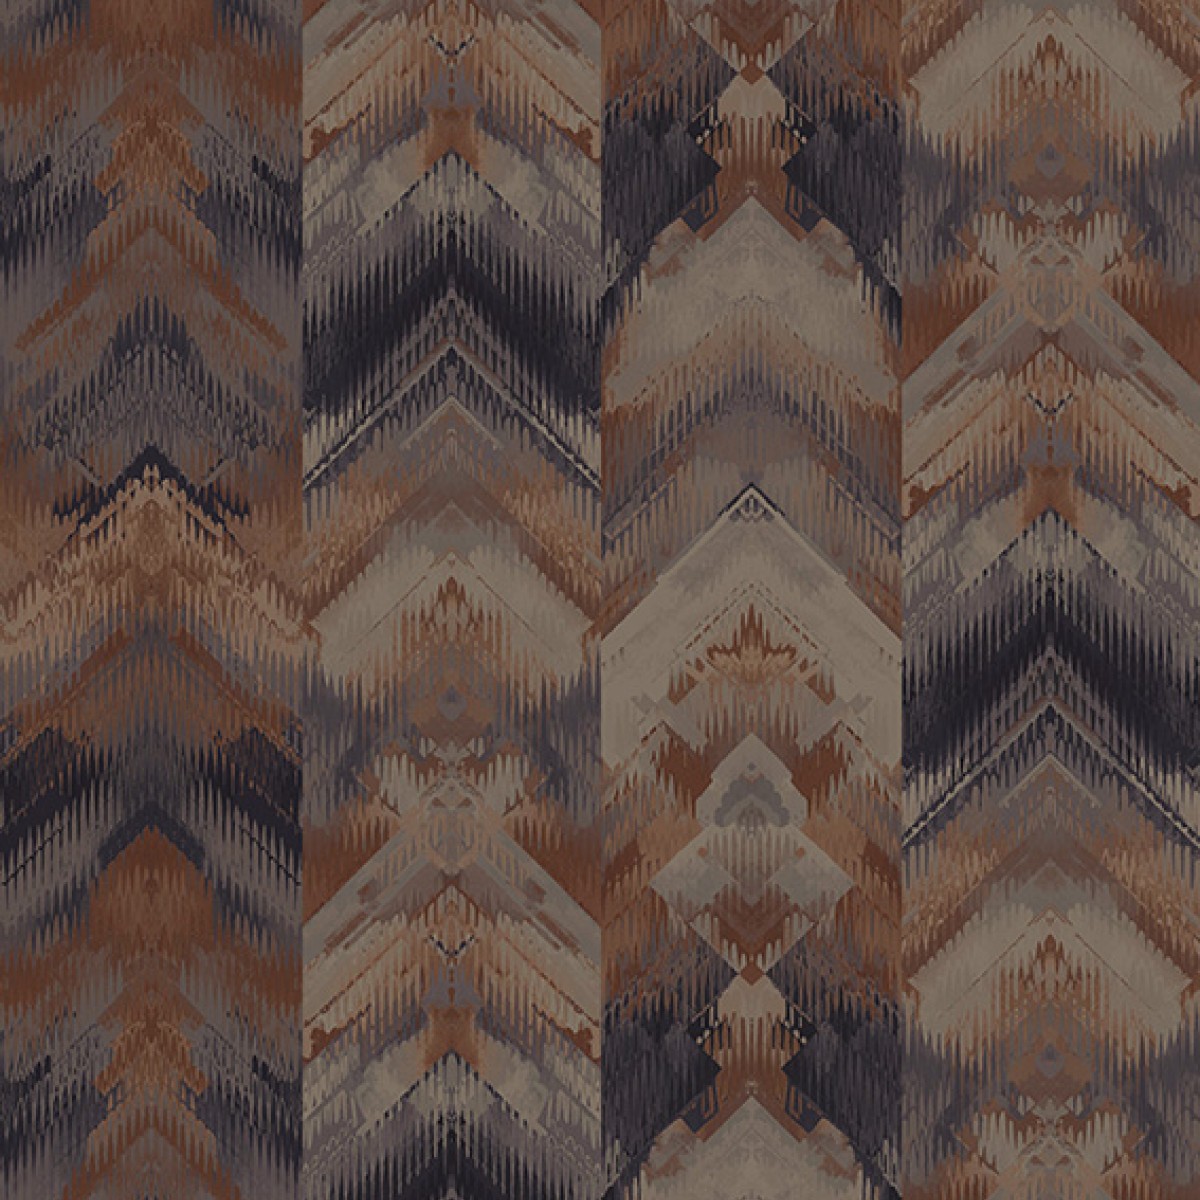 Tapet Reflections, Copper Luxury Geometric, 1838 Wallcoverings, 6.5mp / rola, Tapet living 